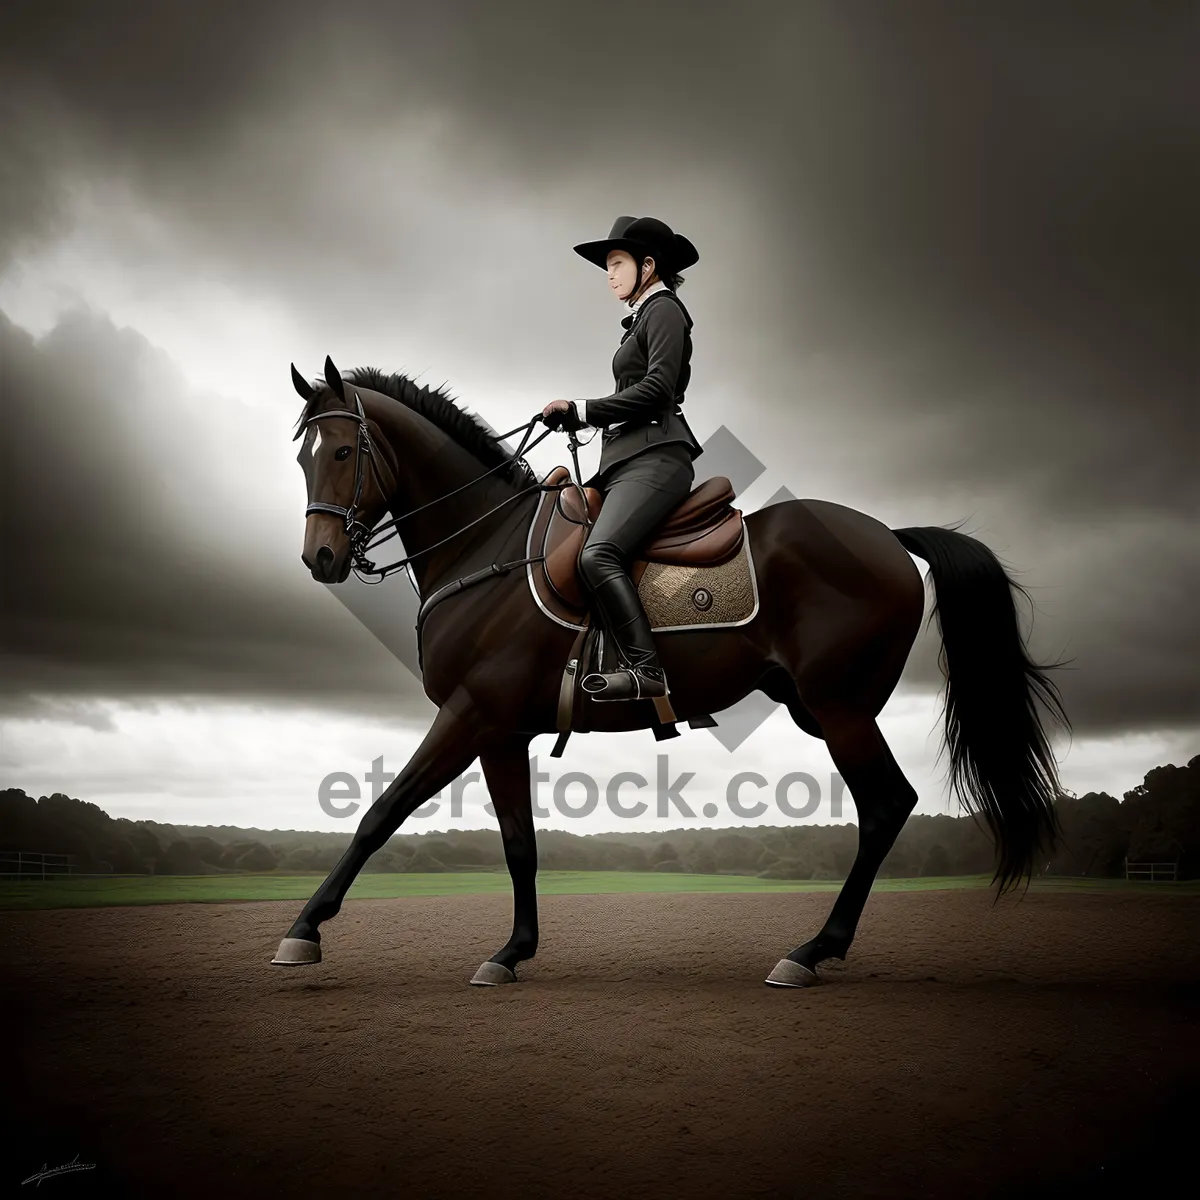 Picture of Dynamic Horseback Riding with Cowboy on Stallion - Equestrian Sport